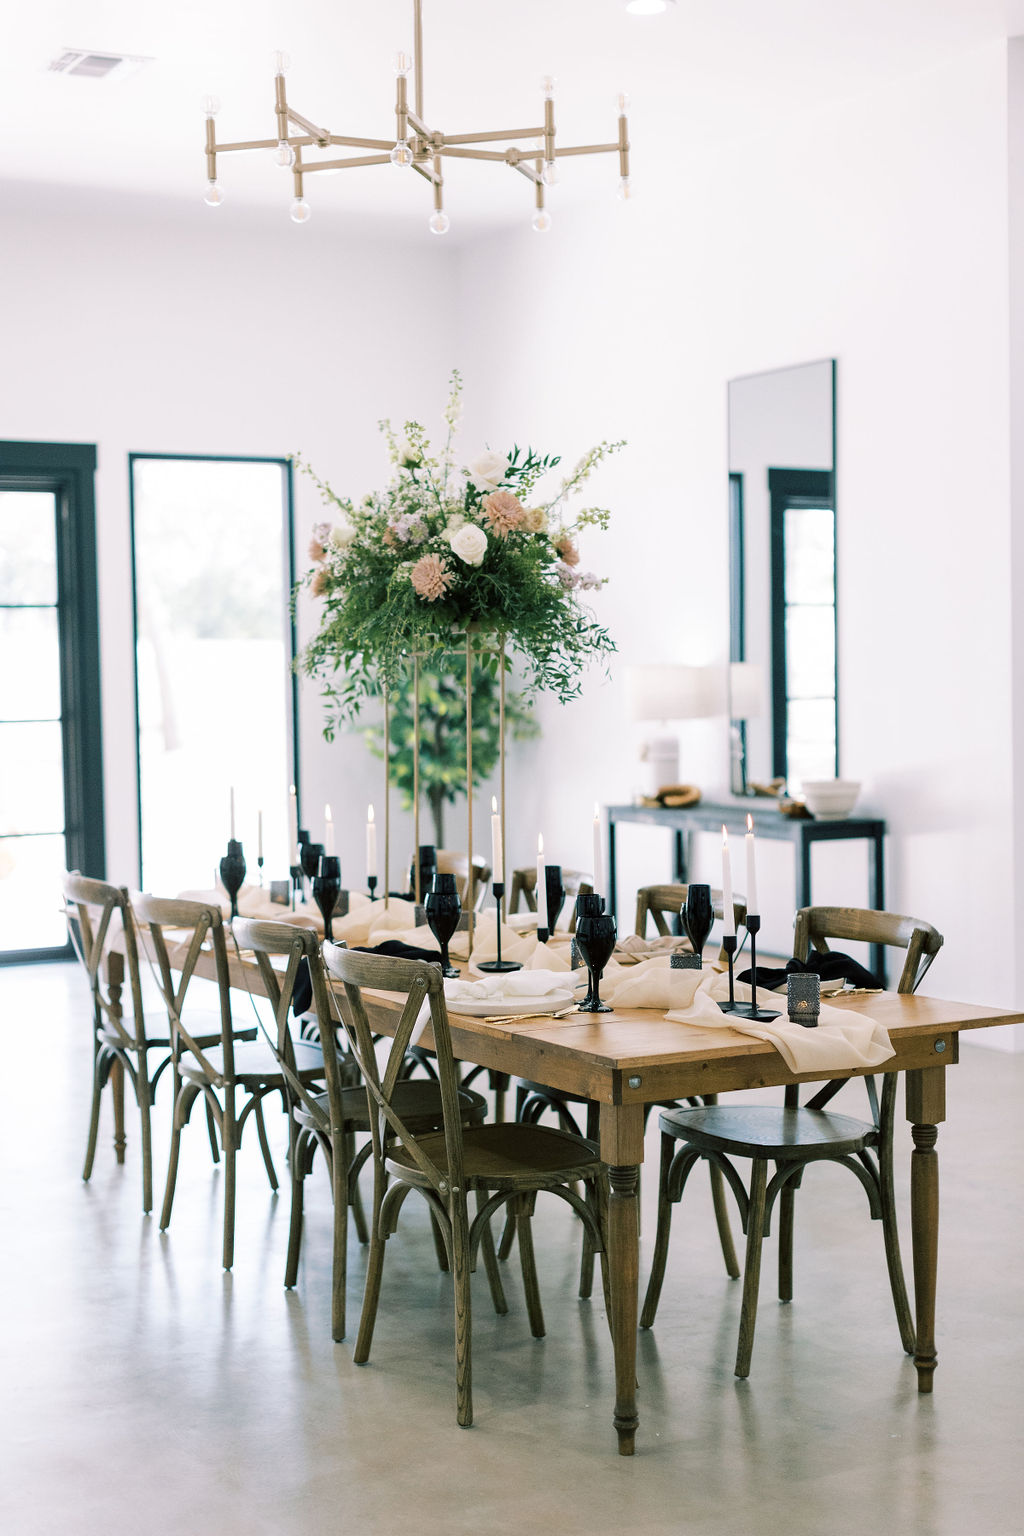 VENUES OF CLEBURNE TOUR AT UNION HOUSE & STYLED SHOOT - Deven Ashley Photo